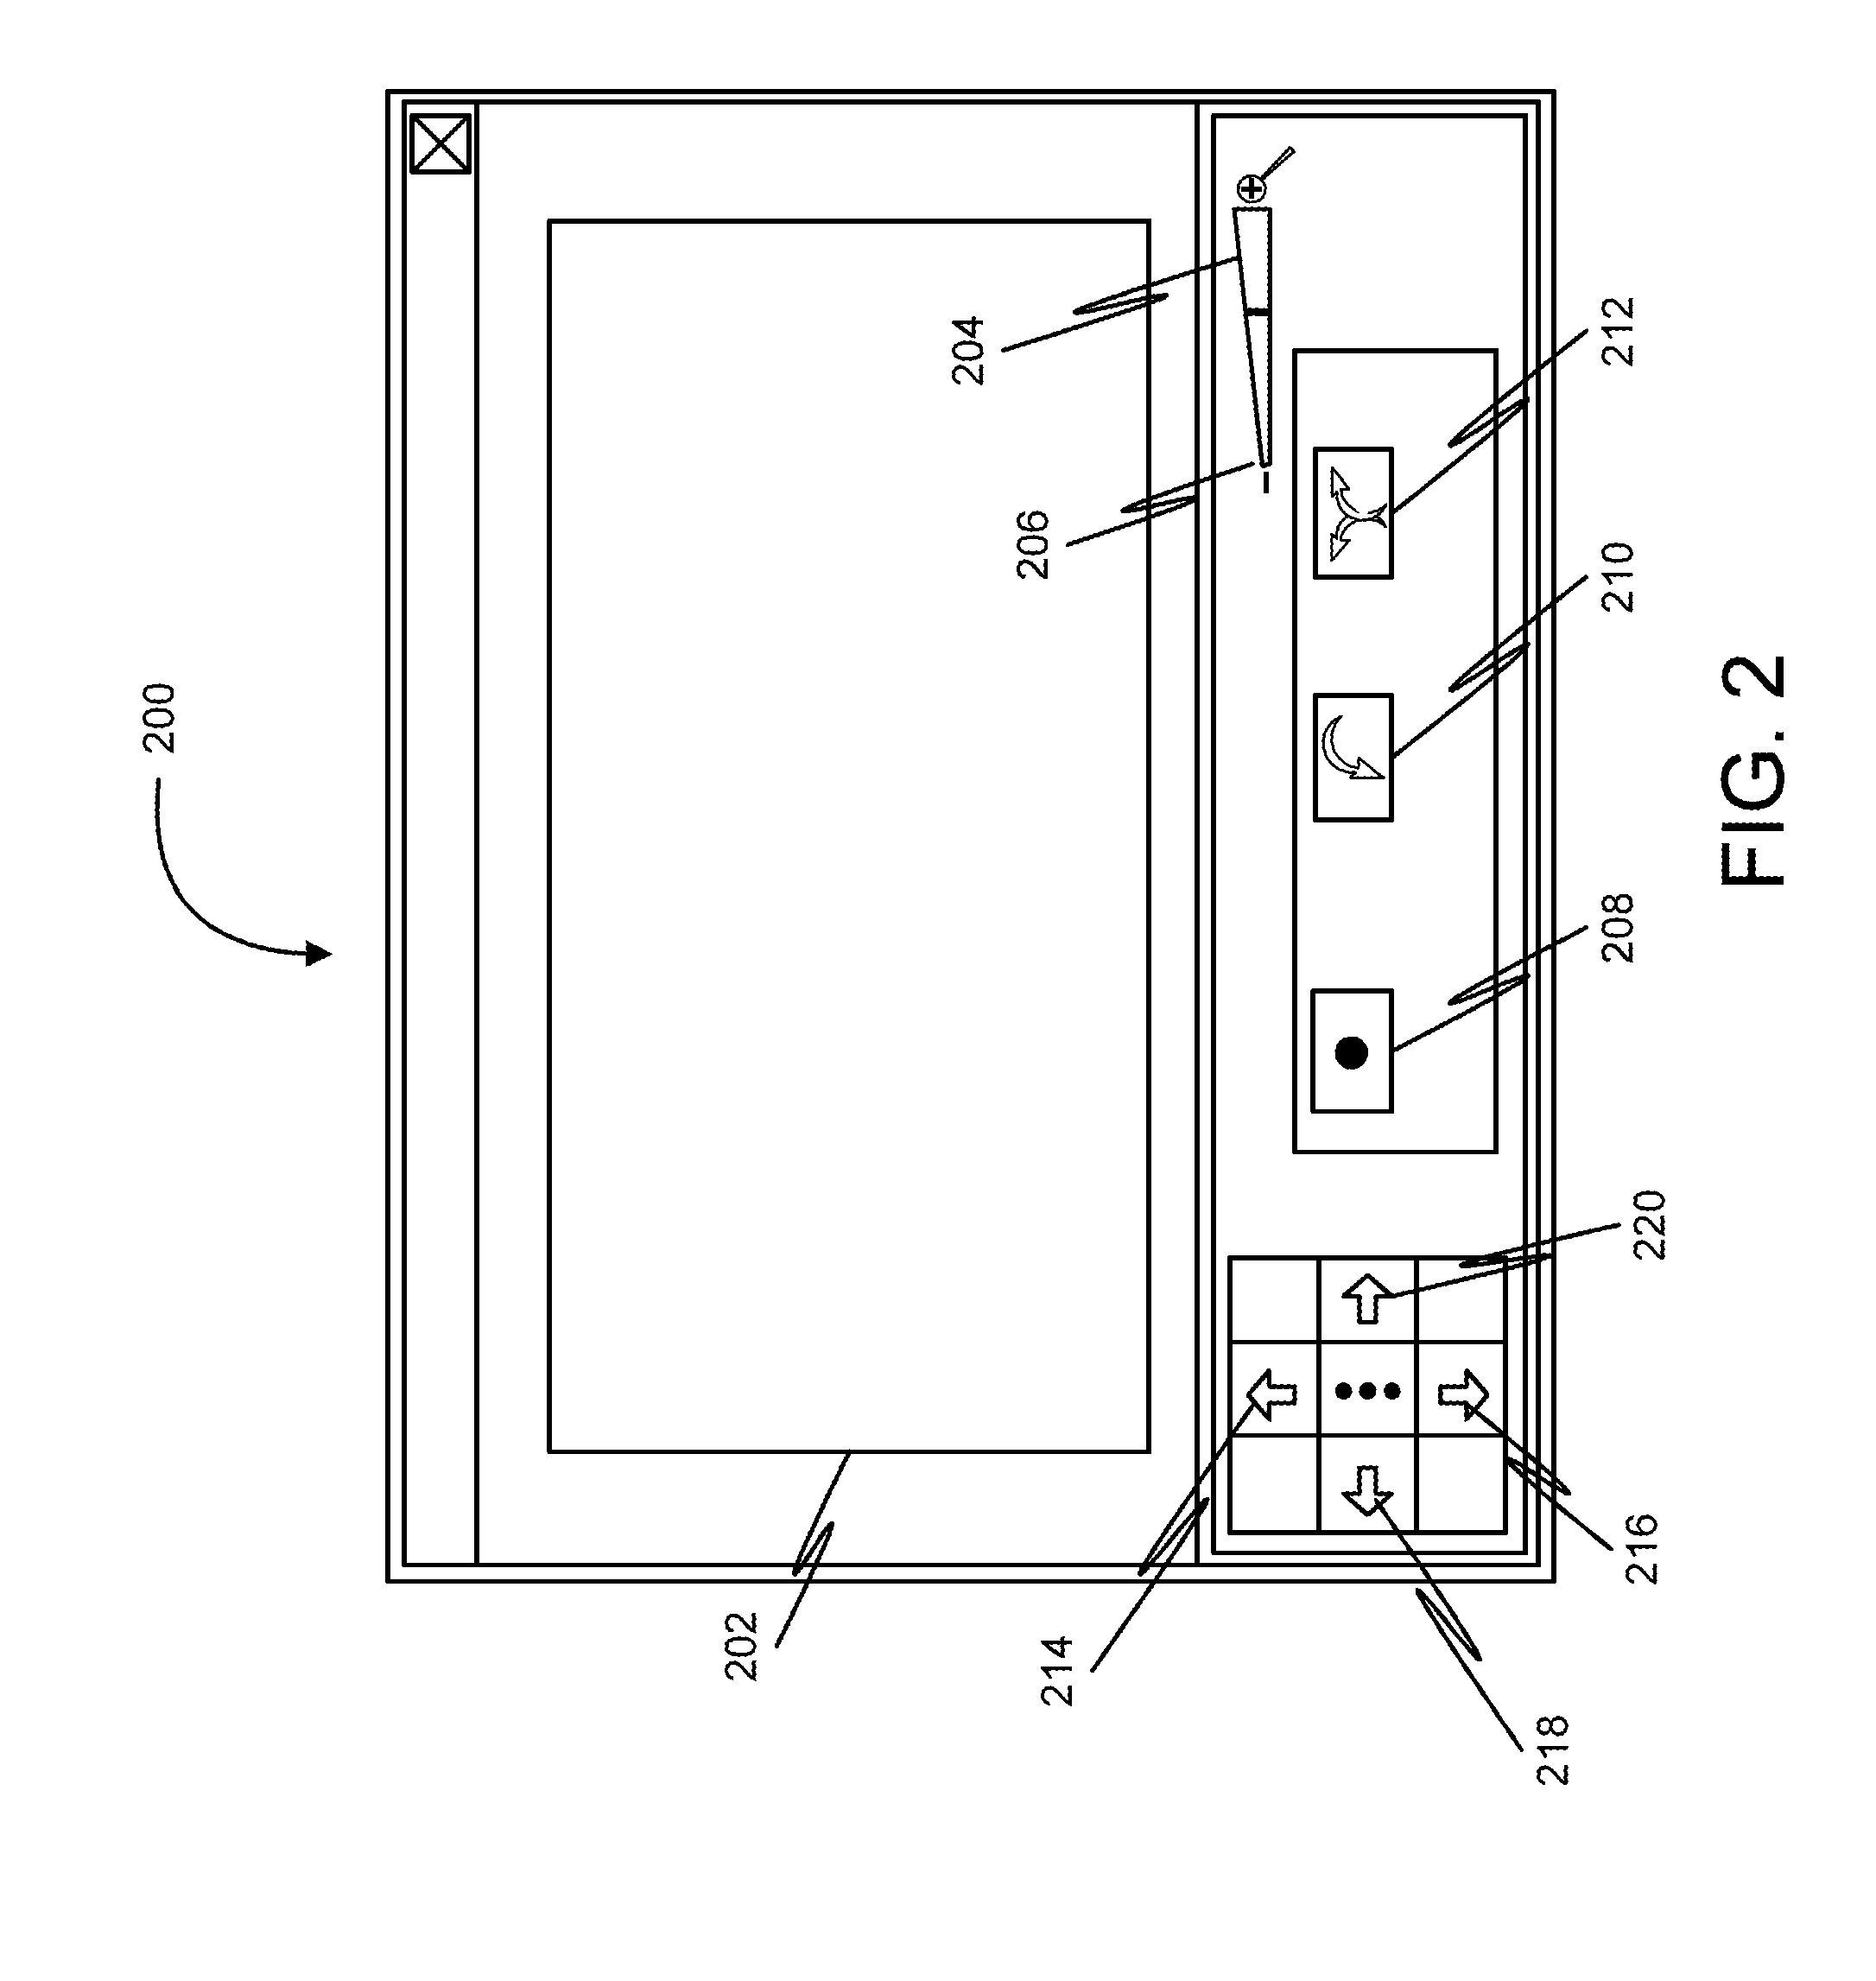 Apparatus and method for hosting a live camera at a given geographical location